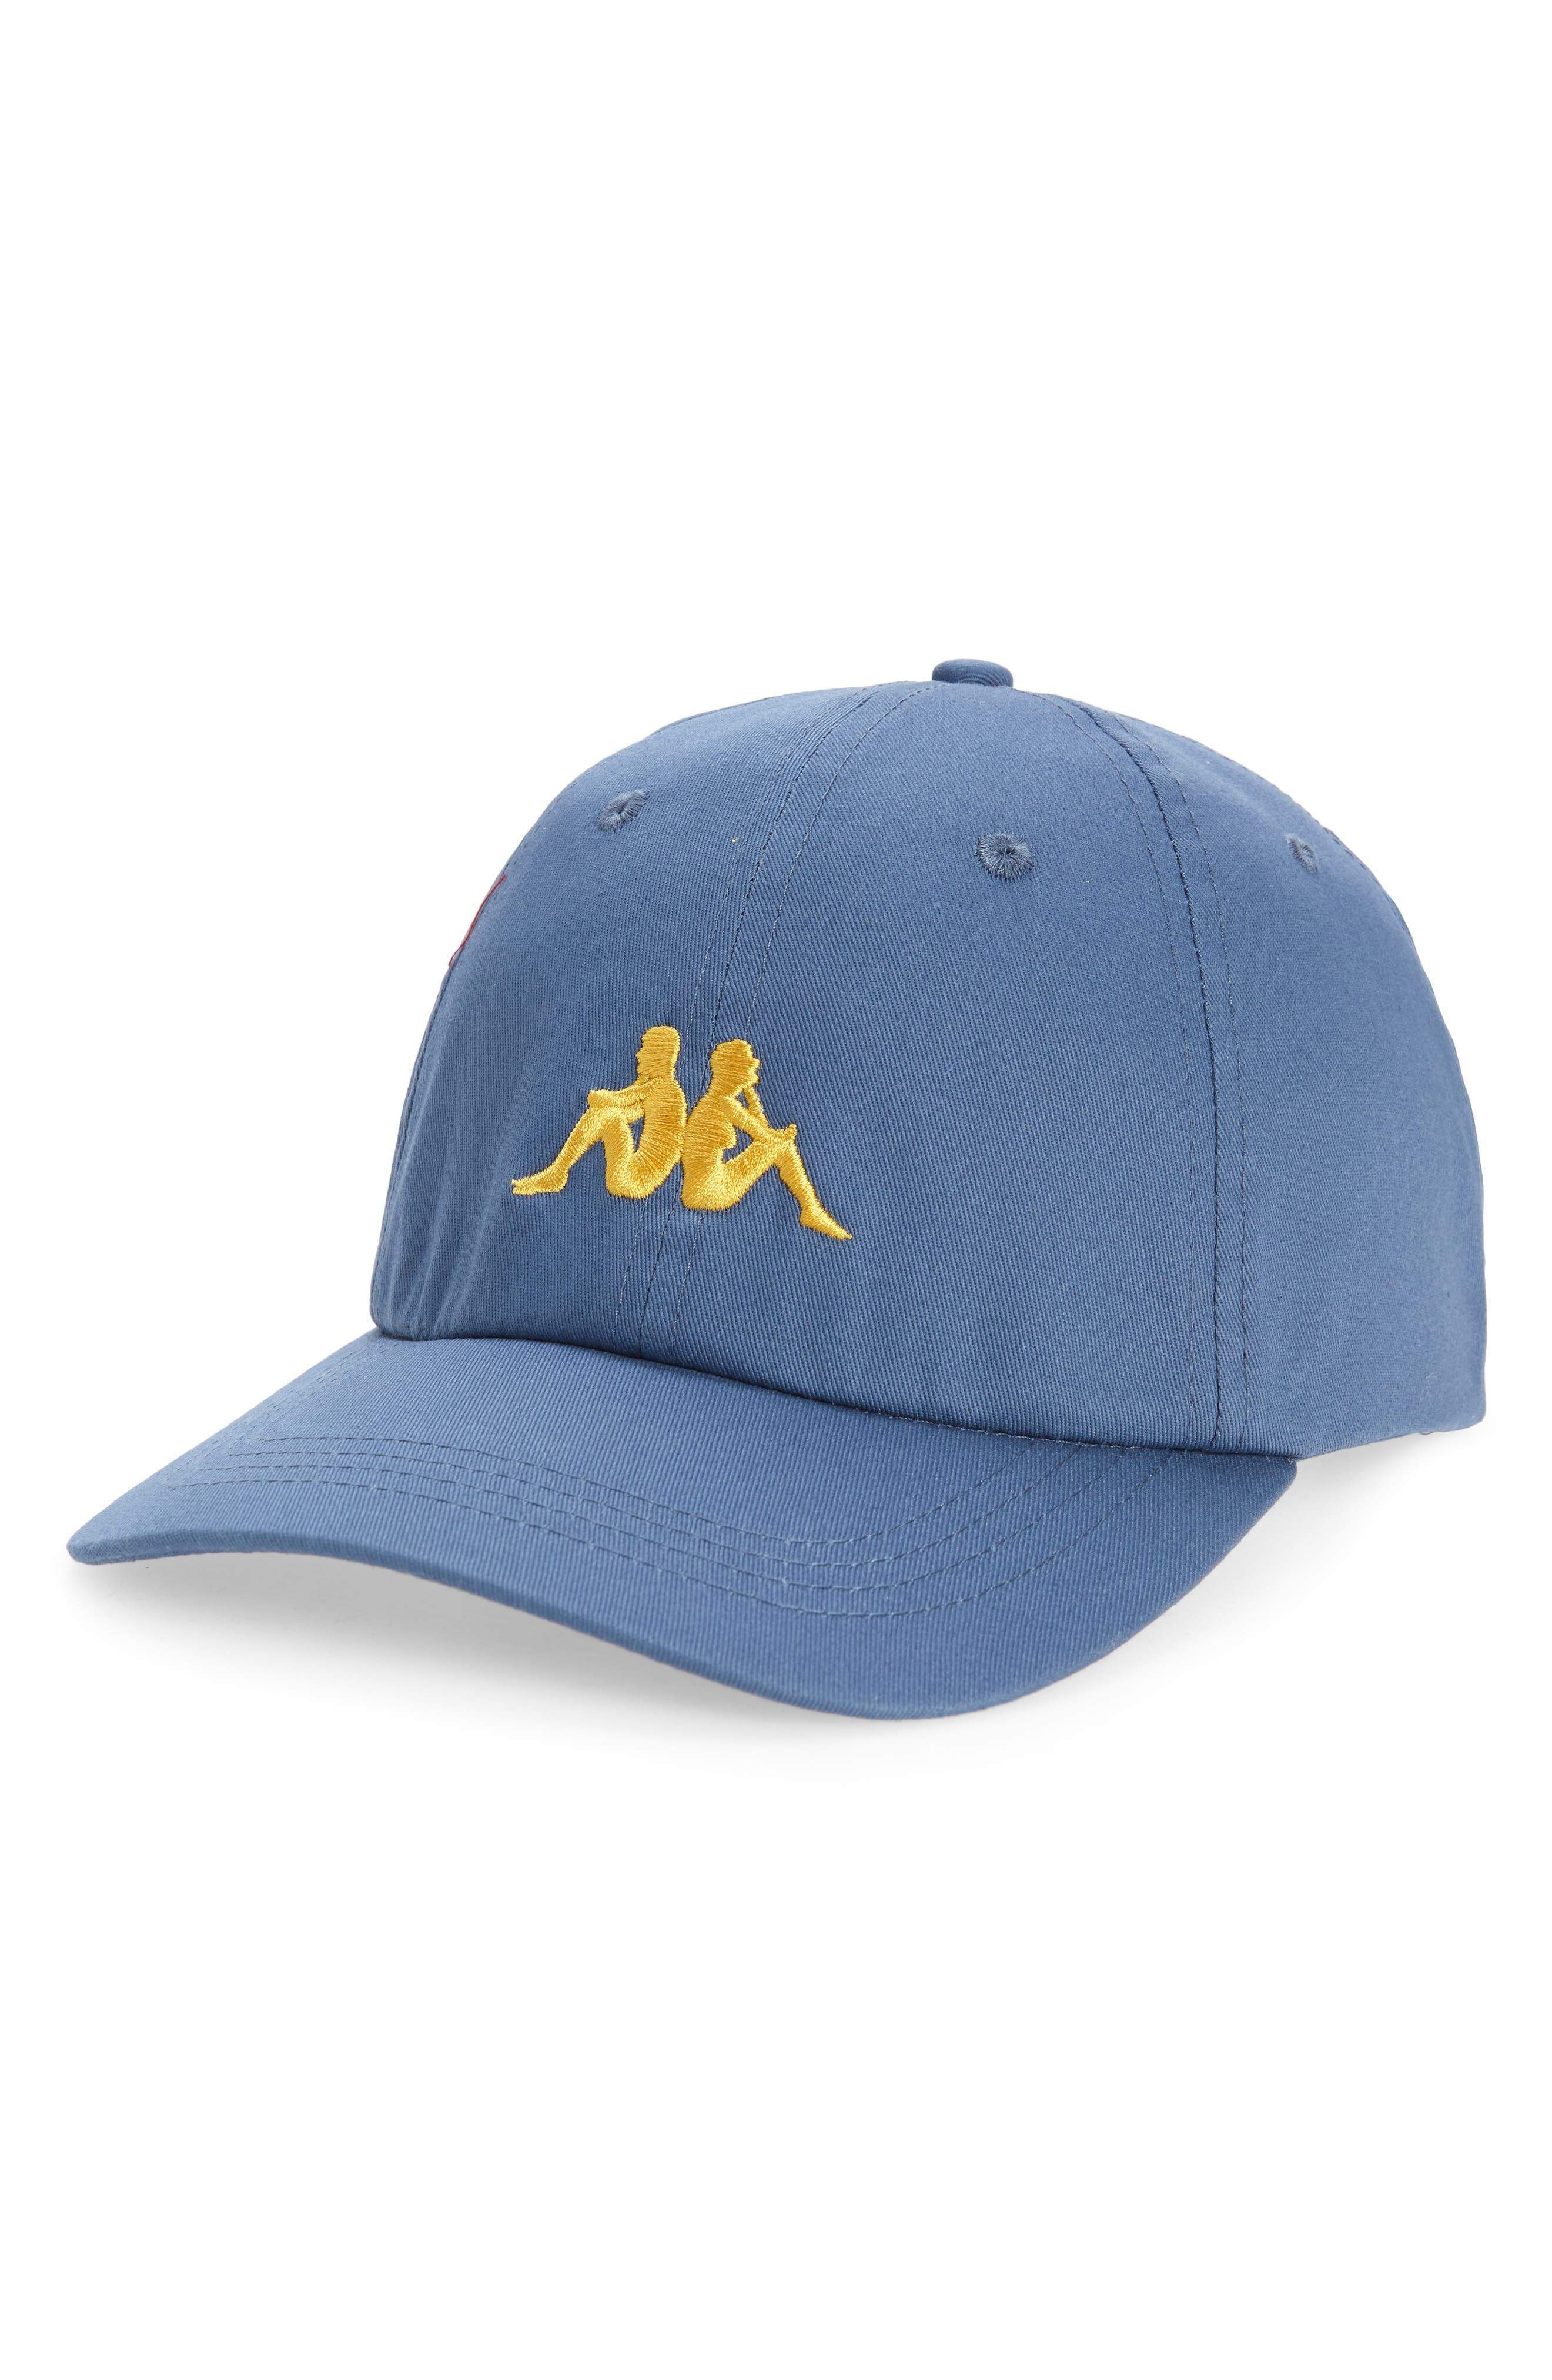 Kappa Authentic Meppel Twill Baseball Cap in Blue Steel-White Bright-Yellow at Nordstrom